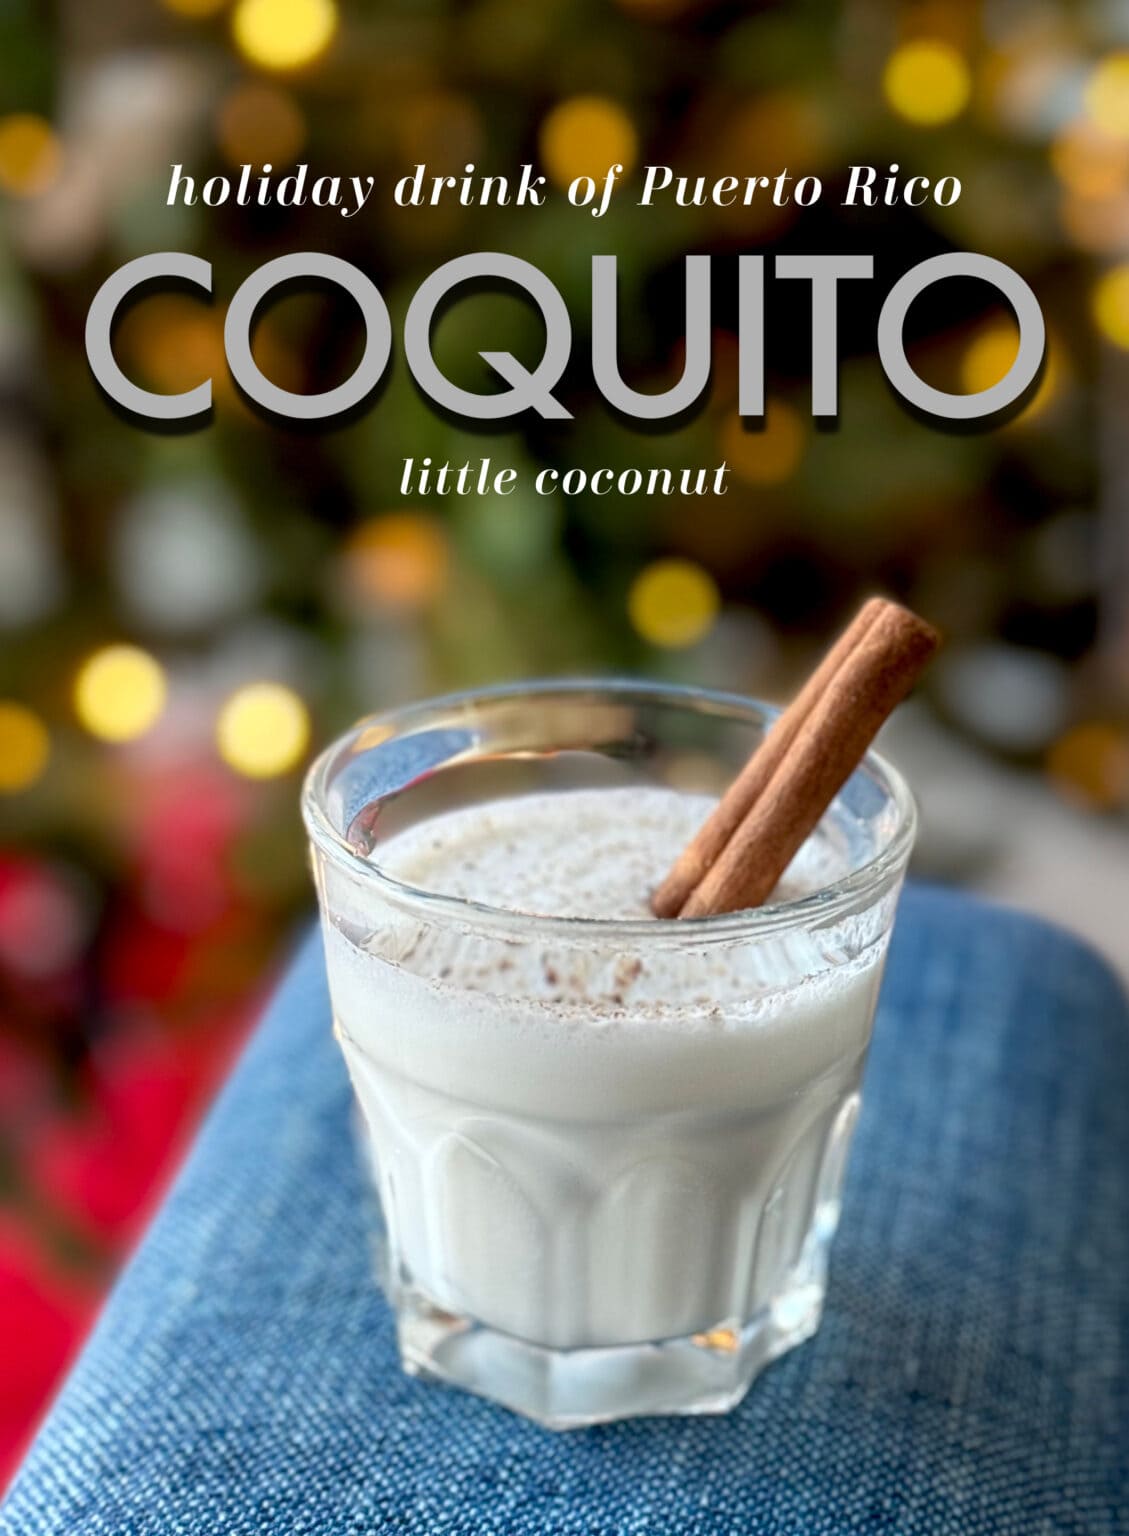 coquito (Puerto Rican rum and milk punch) - The Culinary Chase